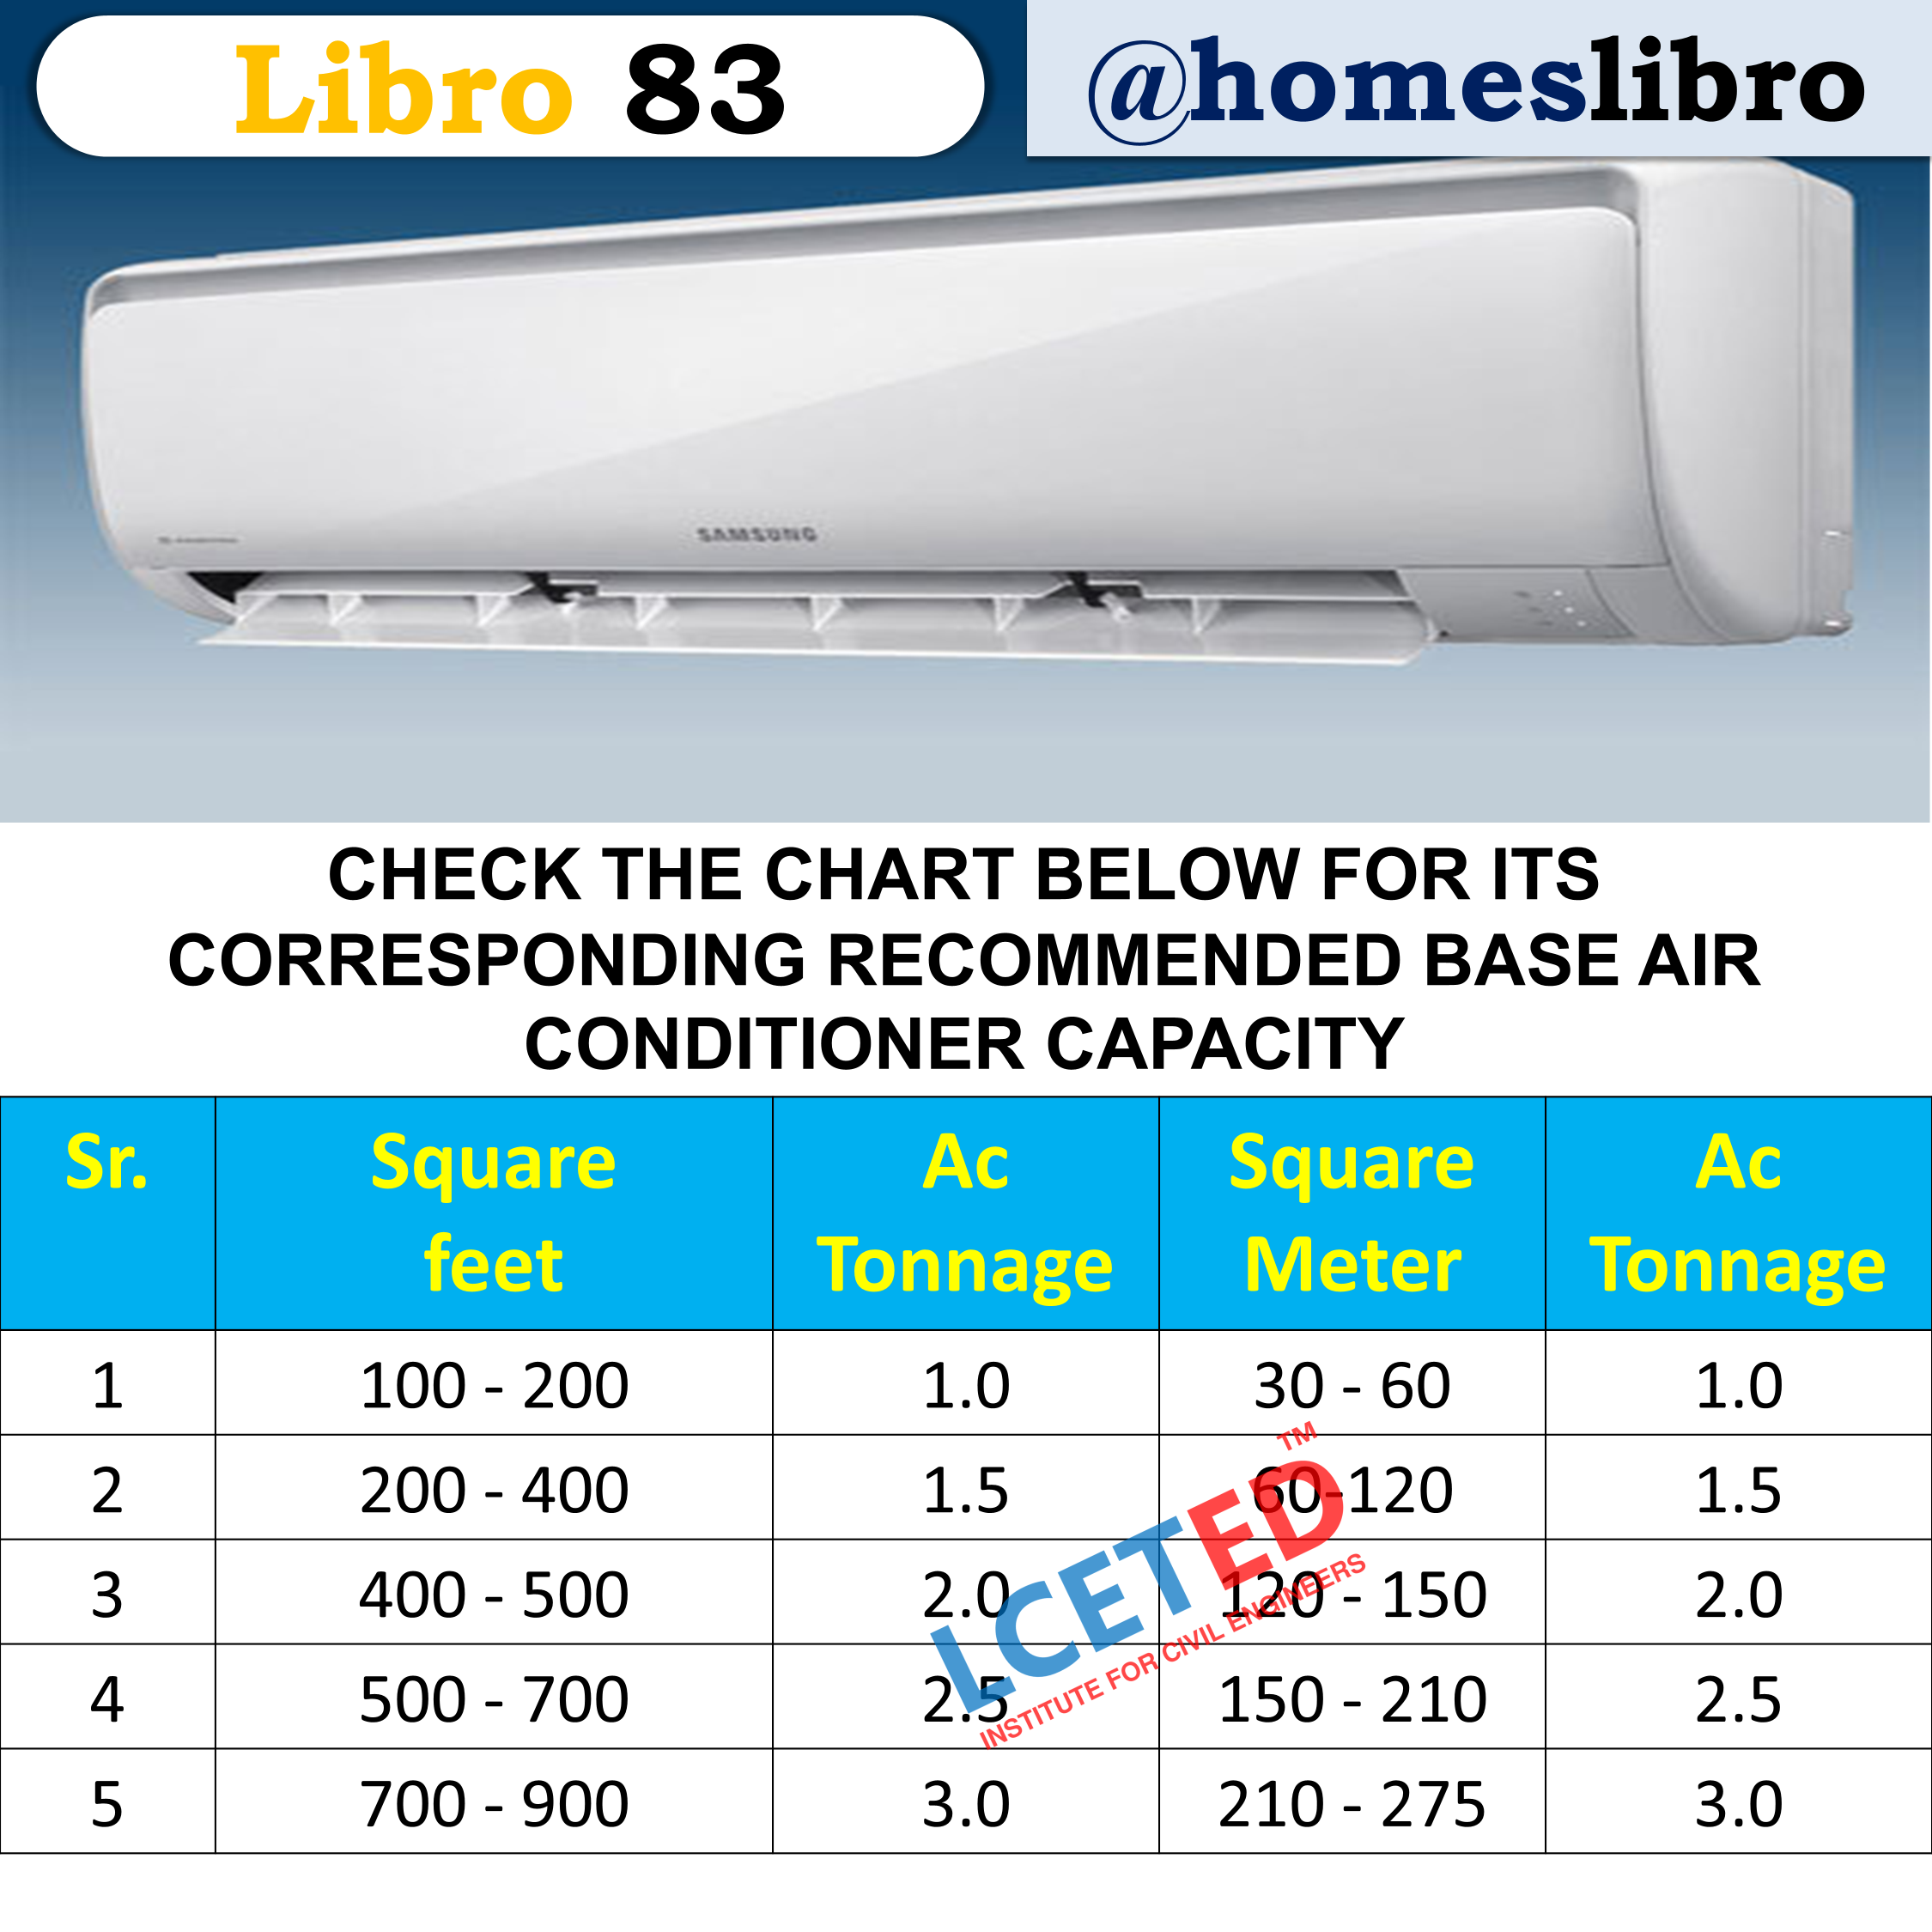 BASIC RECOMMENDED AIR CONDITIONER CAPACITY